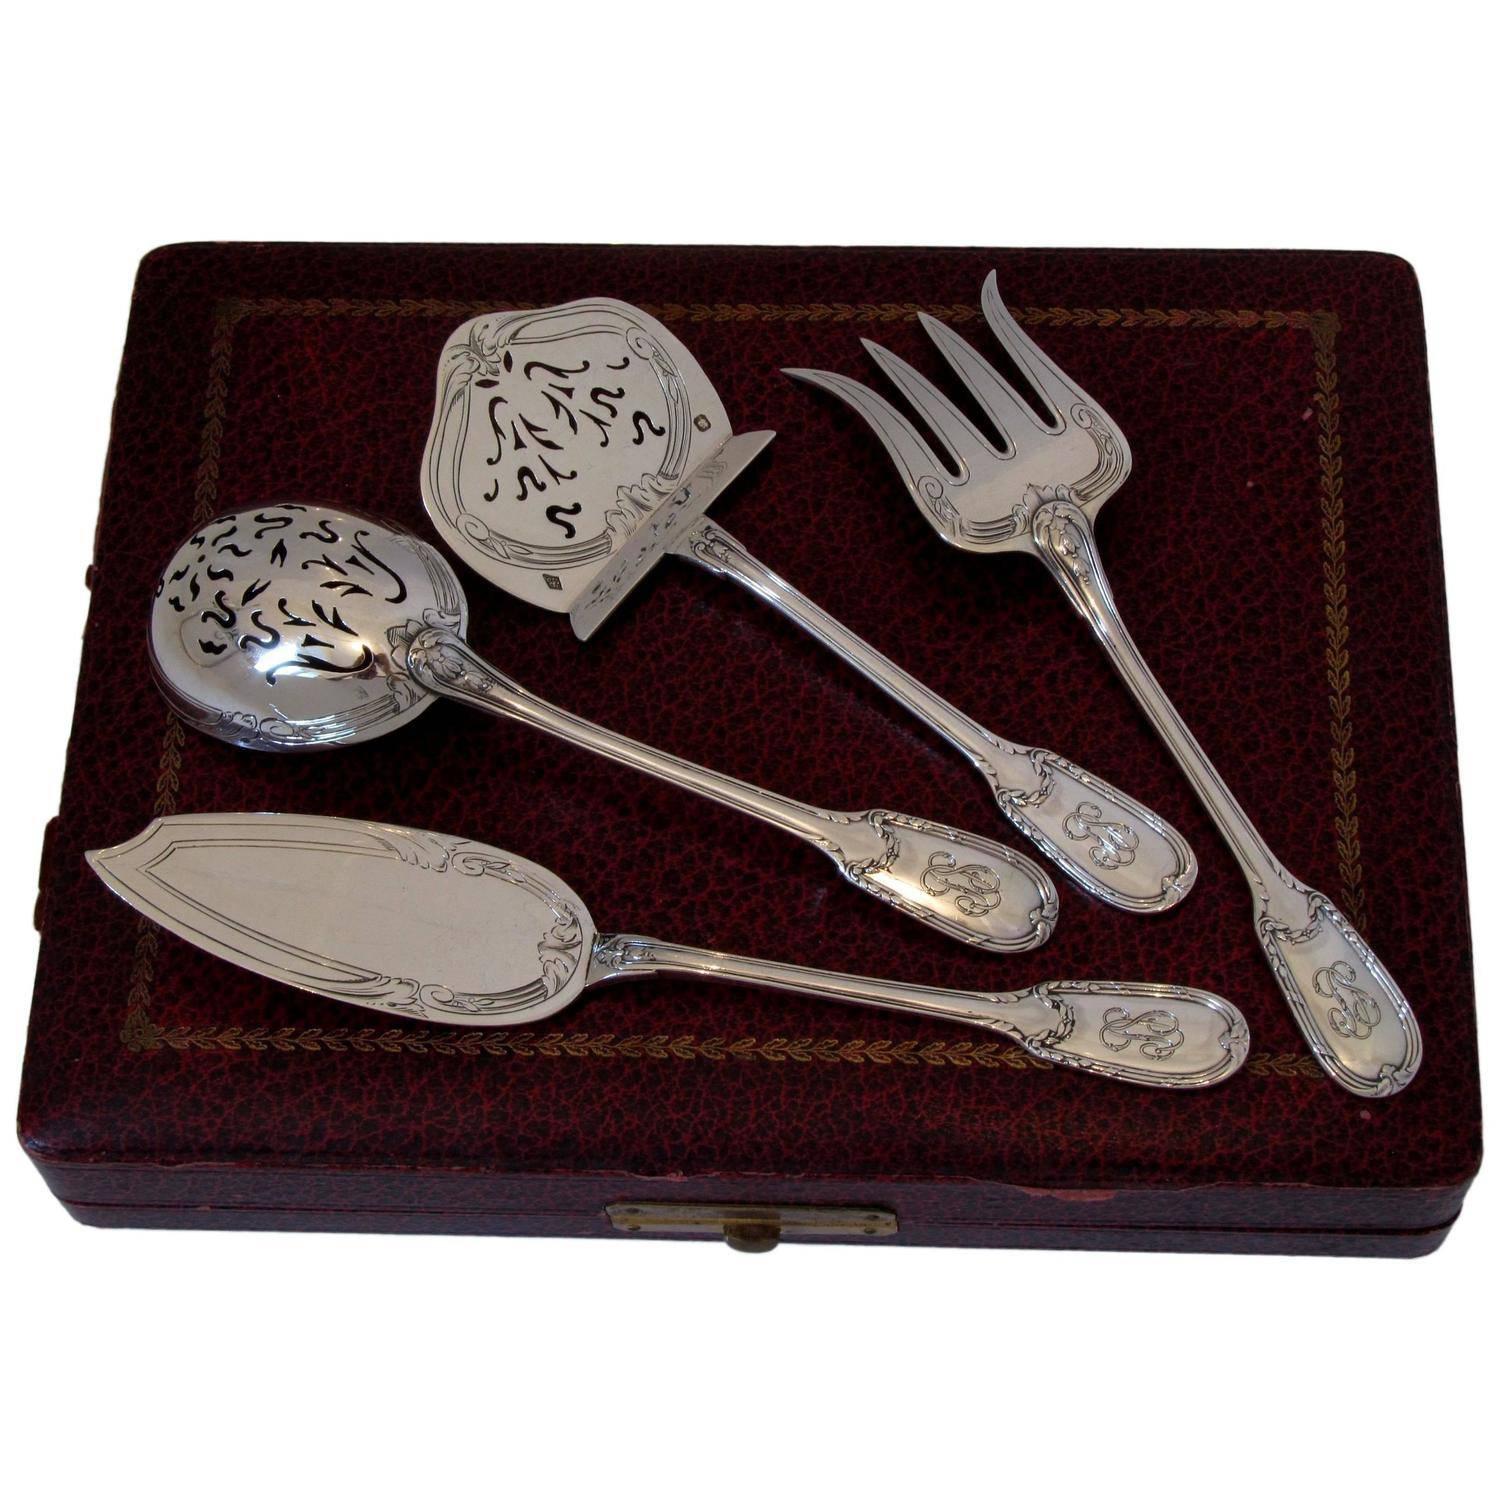 Christofle Rare French All Sterling Silver Dessert Hors D'oeuvre Set Four-Pc Box